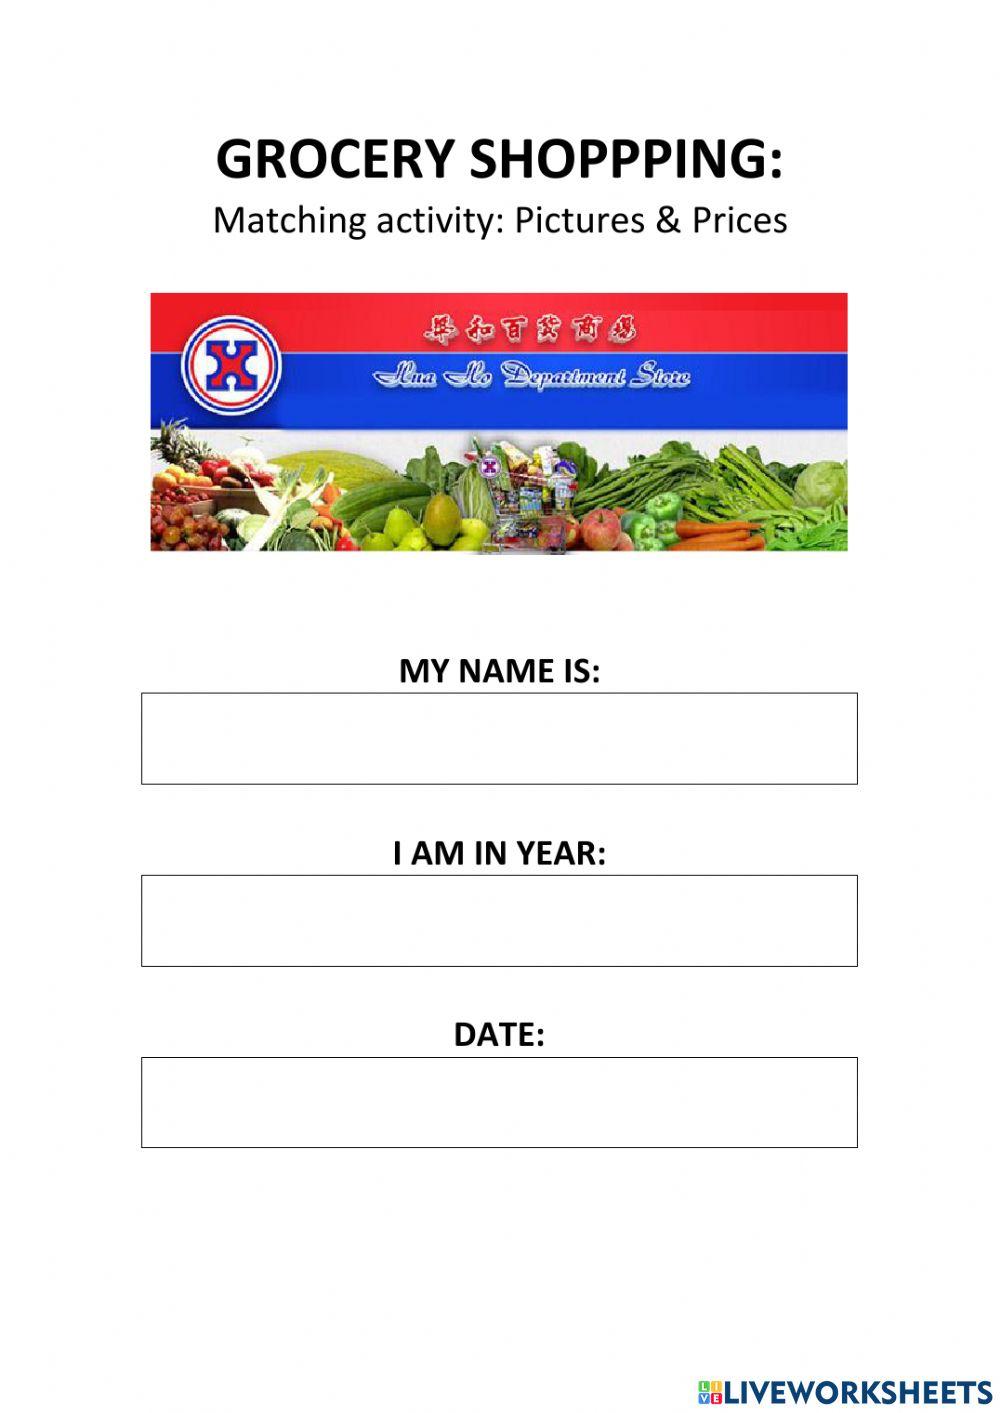 Grocery: matching activity